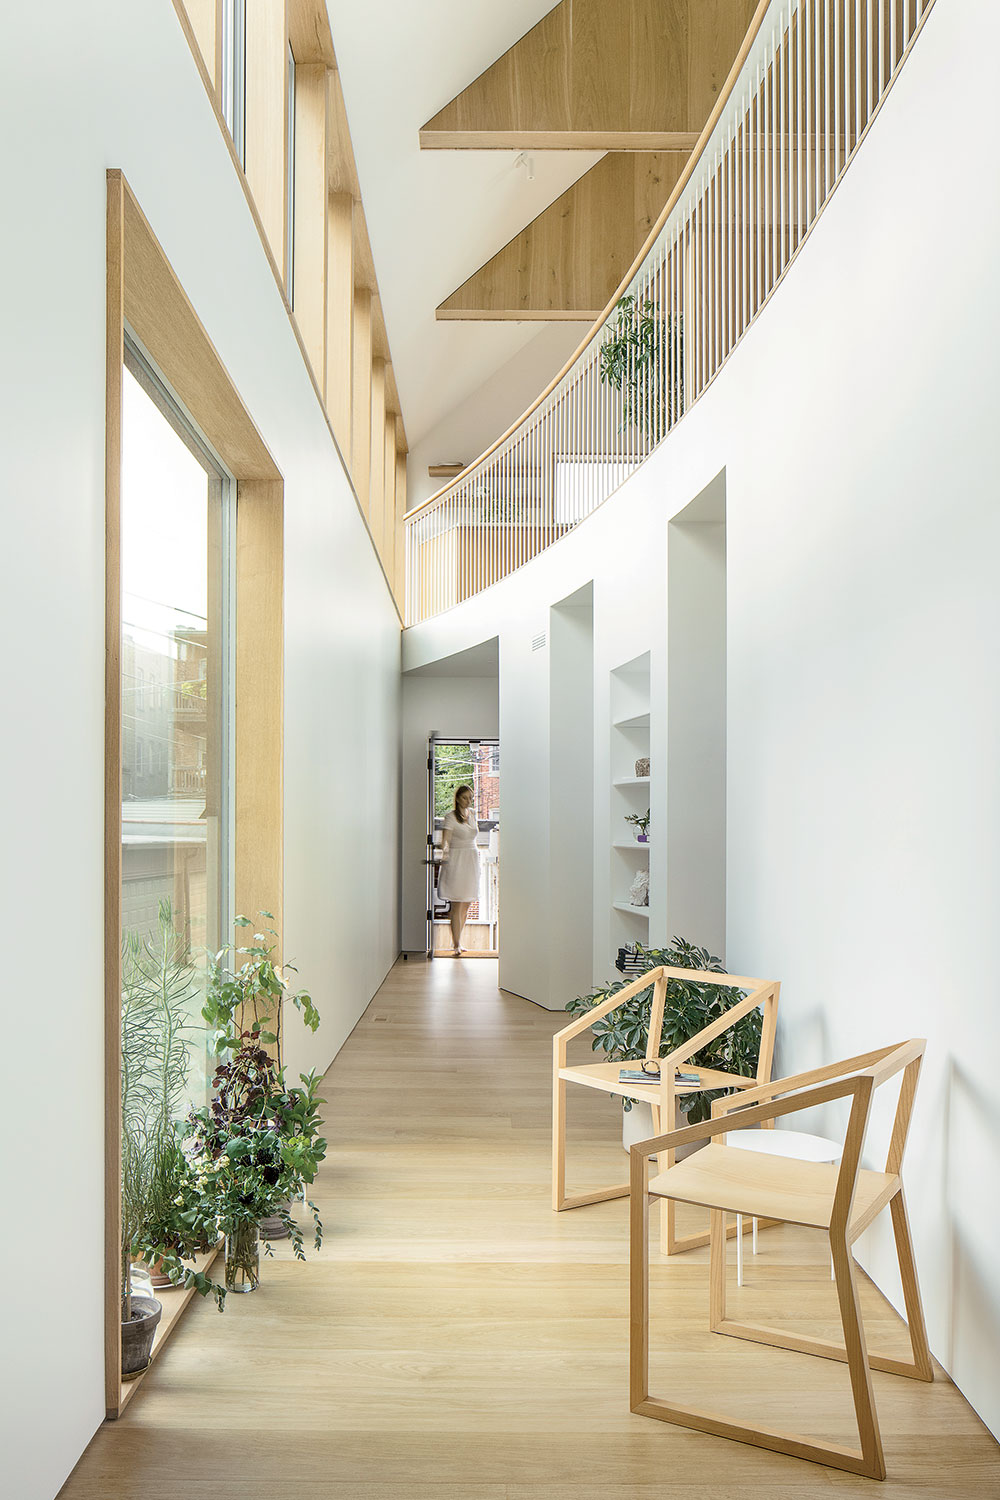 Lap Chi Kwong and Alison Von Glinow gave their Edgewater residence a curved atrium instead of a traditional entrance foyer and hallway.